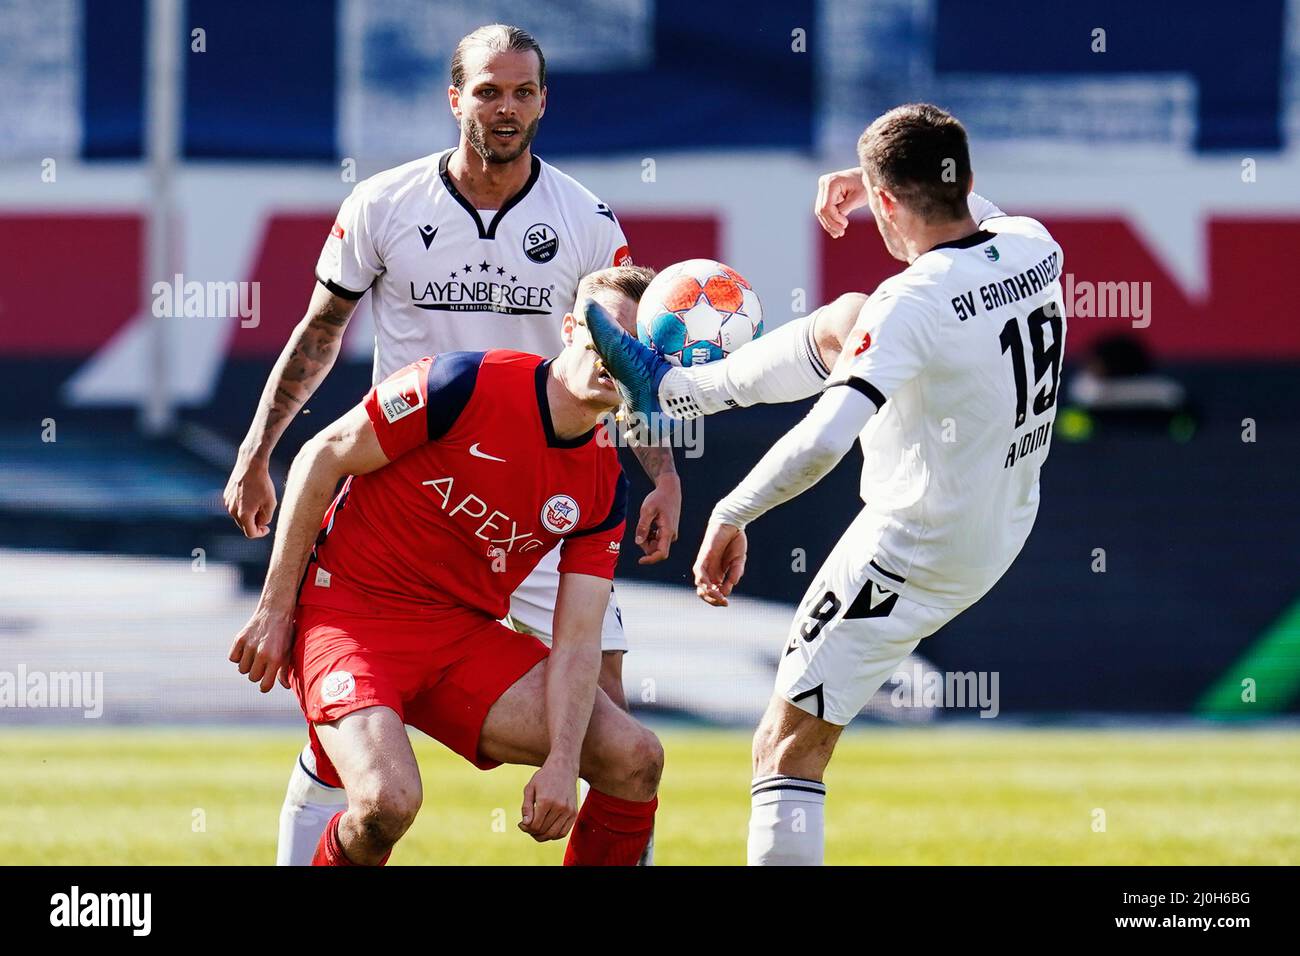 Sandhausen, Germany. 19th Mar, 2022. Soccer: 2. Bundesliga, SV Sandhausen - Hansa Rostock, Matchday 27, BWT-Stadion am Hardtwald. Sandhausen's Dennis Diekmeier (l-r), Rostock's Svante Ingelsson and Sandhausen's Bashkim Ajdini fight for the ball. Credit: Uwe Anspach/dpa - IMPORTANT NOTE: In accordance with the requirements of the DFL Deutsche Fußball Liga and the DFB Deutscher Fußball-Bund, it is prohibited to use or have used photographs taken in the stadium and/or of the match in the form of sequence pictures and/or video-like photo series./dpa/Alamy Live News Stock Photo